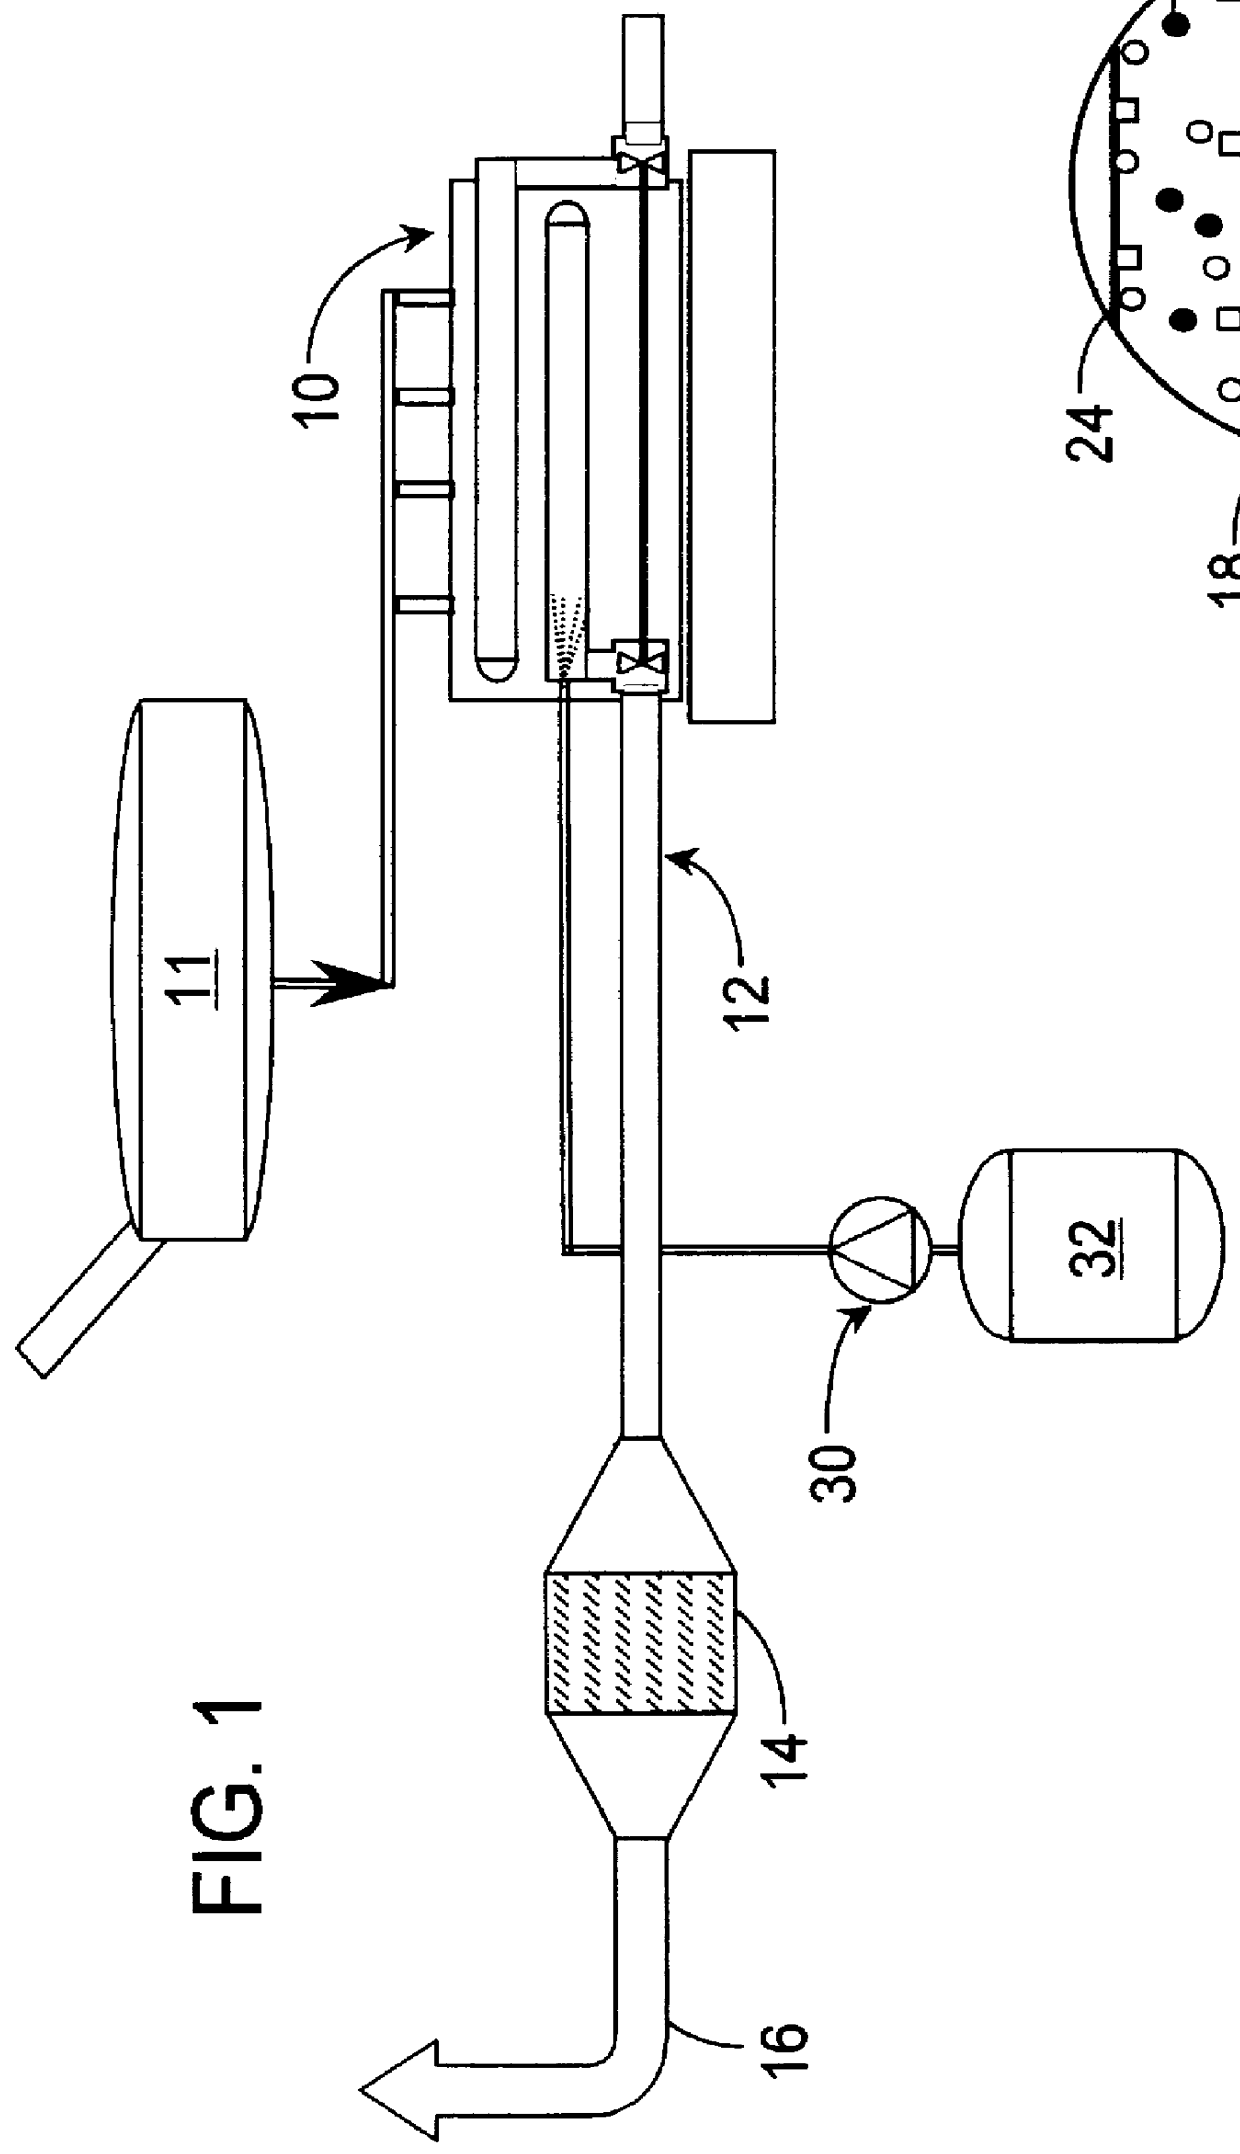 Method for reducing emissions from a diesel engine